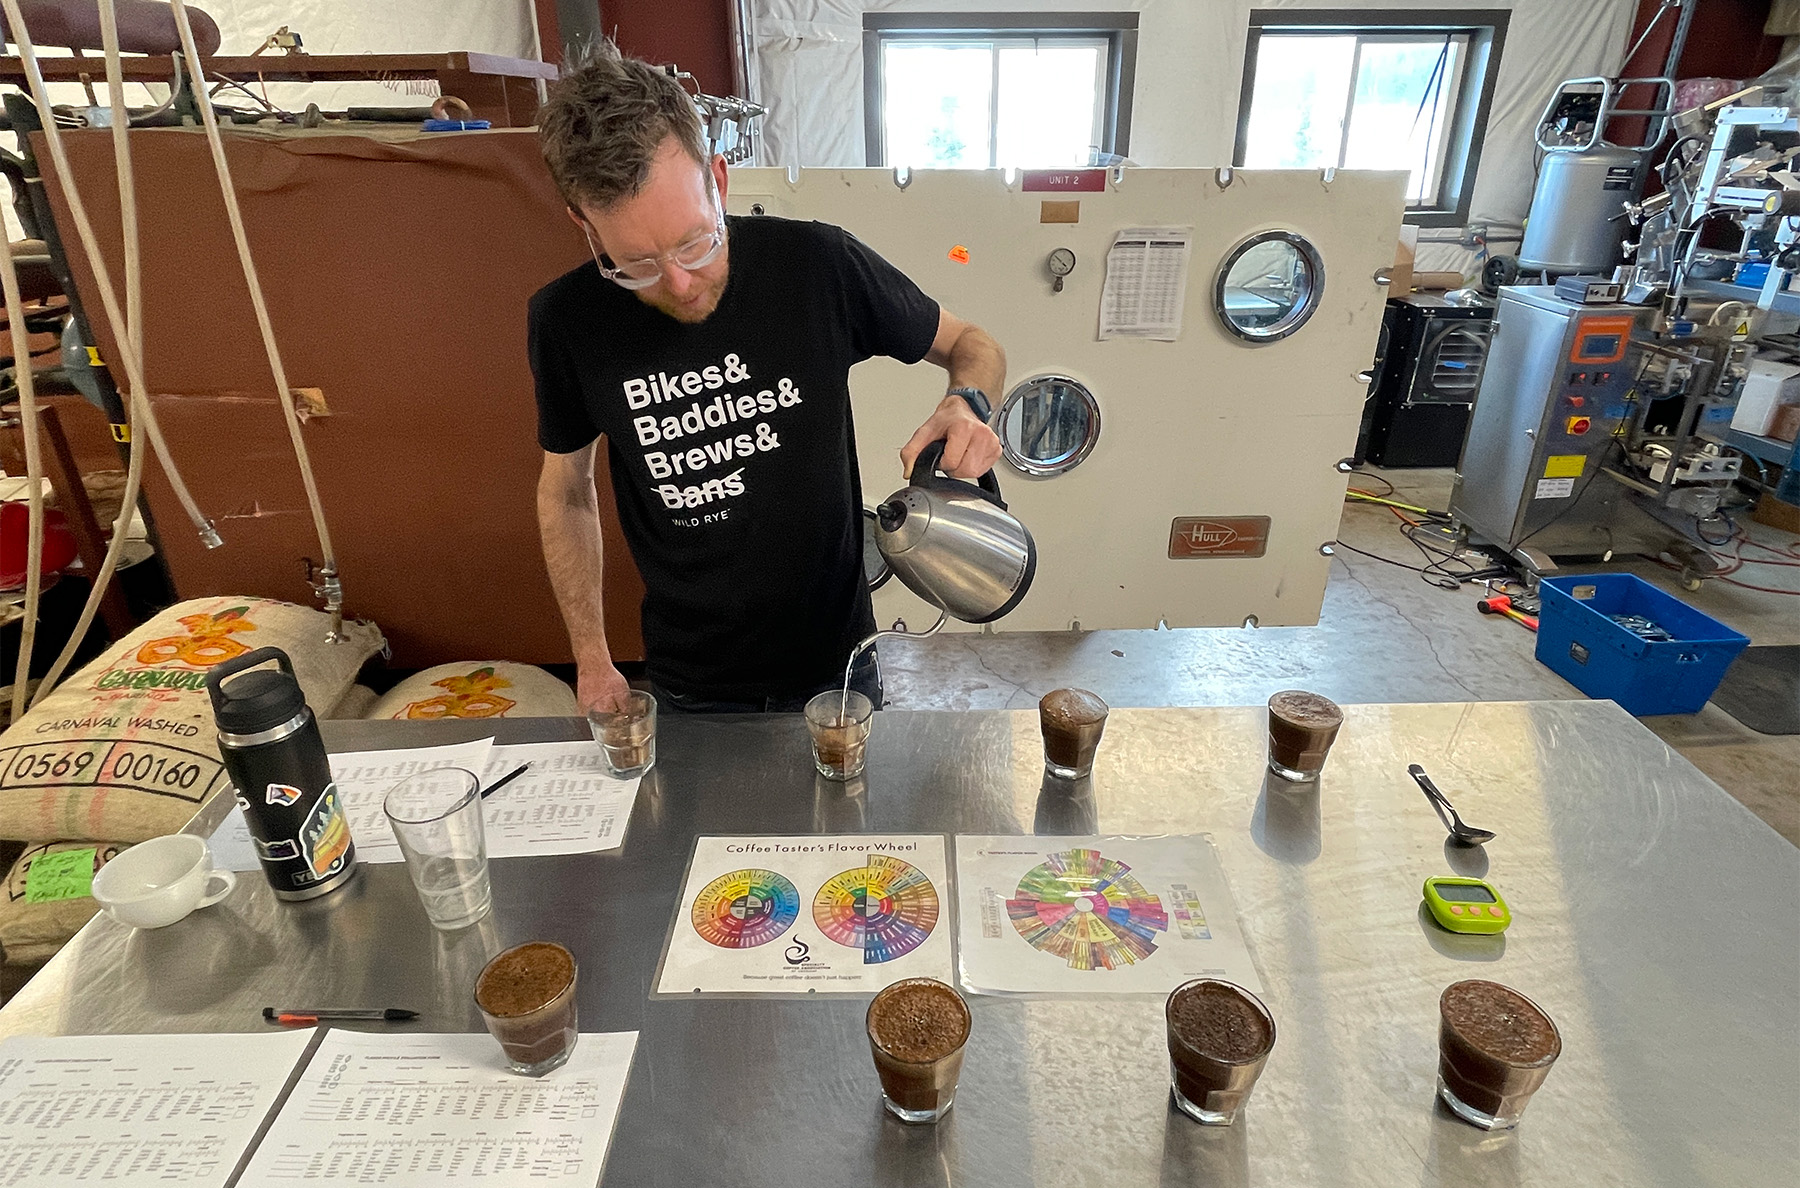 What’s the best way to make coffee? Strong opinions abound, and Jonathan is currently trying to figure out the right answer for himself. So in part 2 of our CRAFTED podcast series, Sam Higby, co-owner of First Ascent Coffee Roasters, joins Jonathan to talk pour overs, grinders, brewing at altitude, programmability, and more. Listen up, then let us know what your pick is for the best coffee-making setup out there.